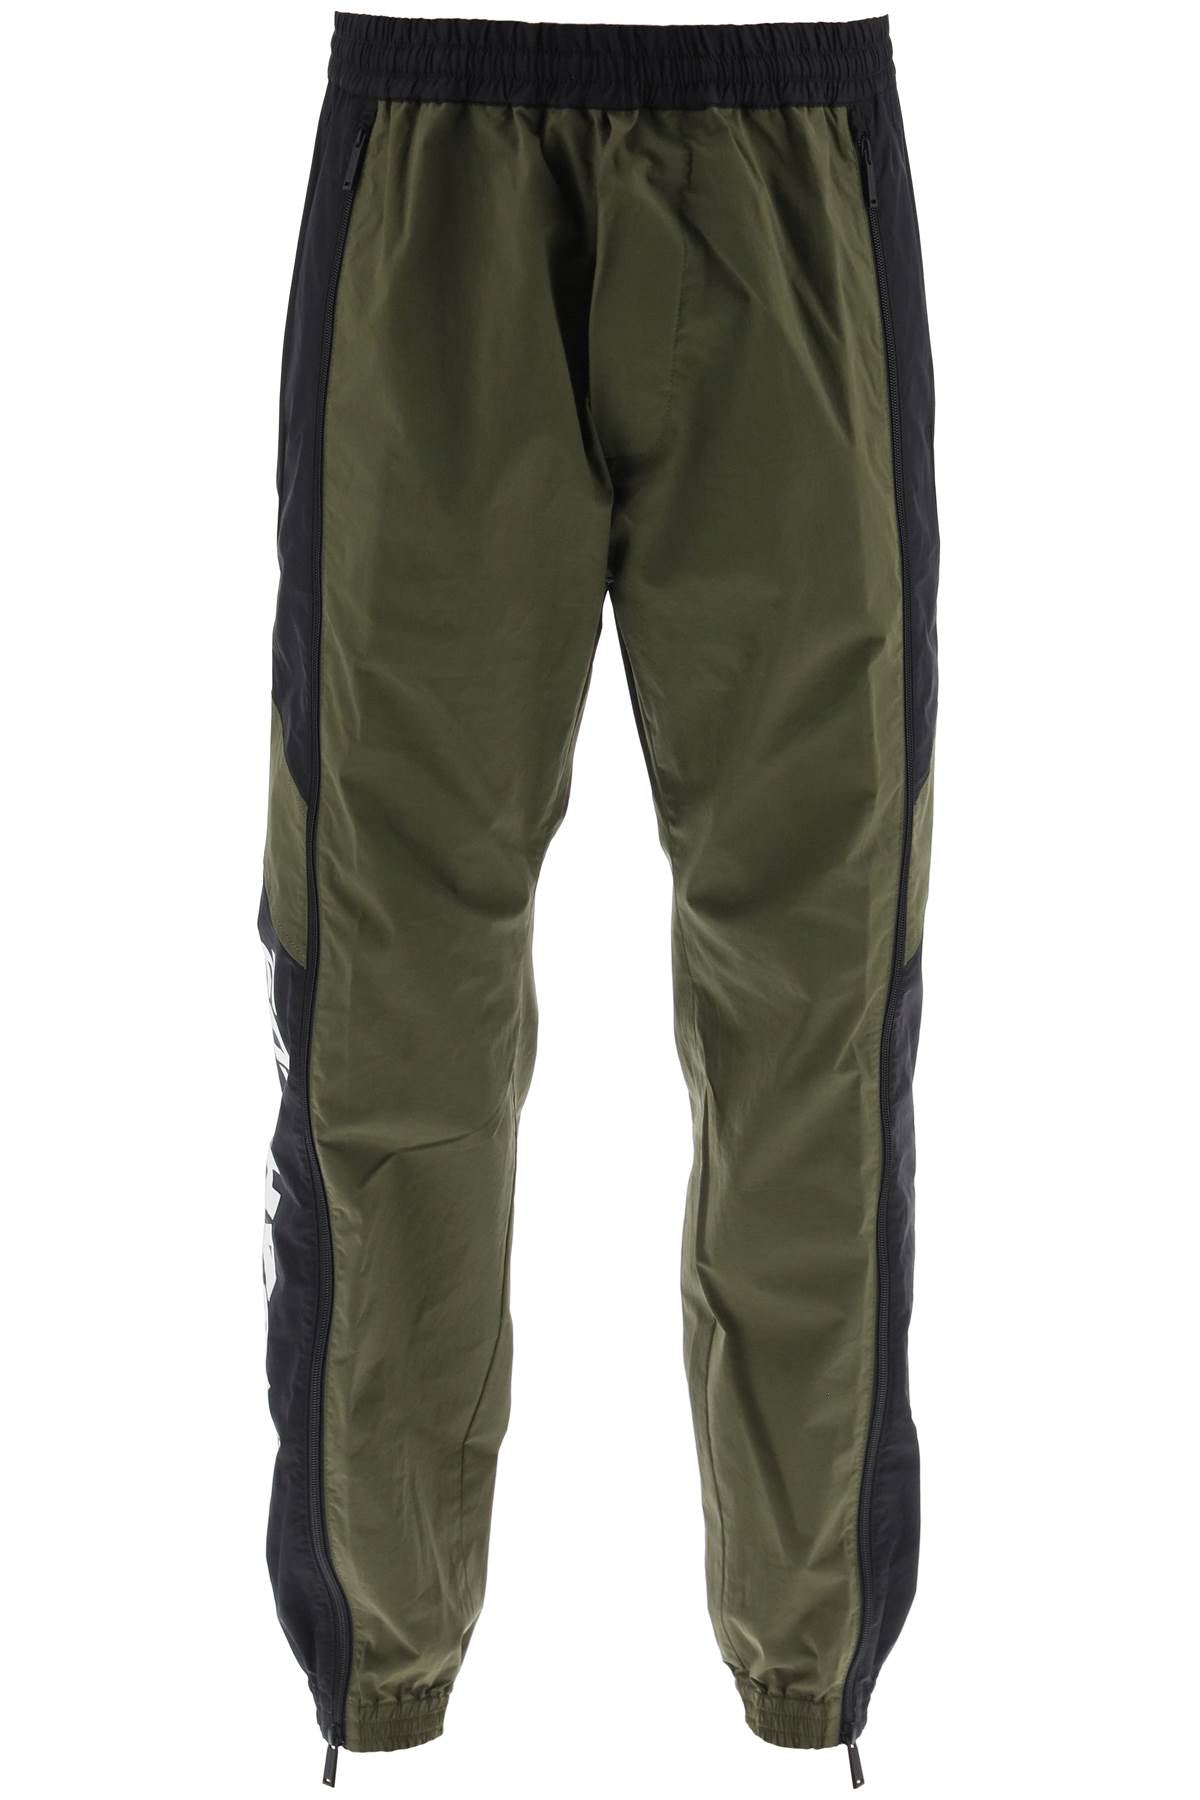 Dsquared2 stretch cotton pants S74KB0800 S53578 OLIVE GREEN